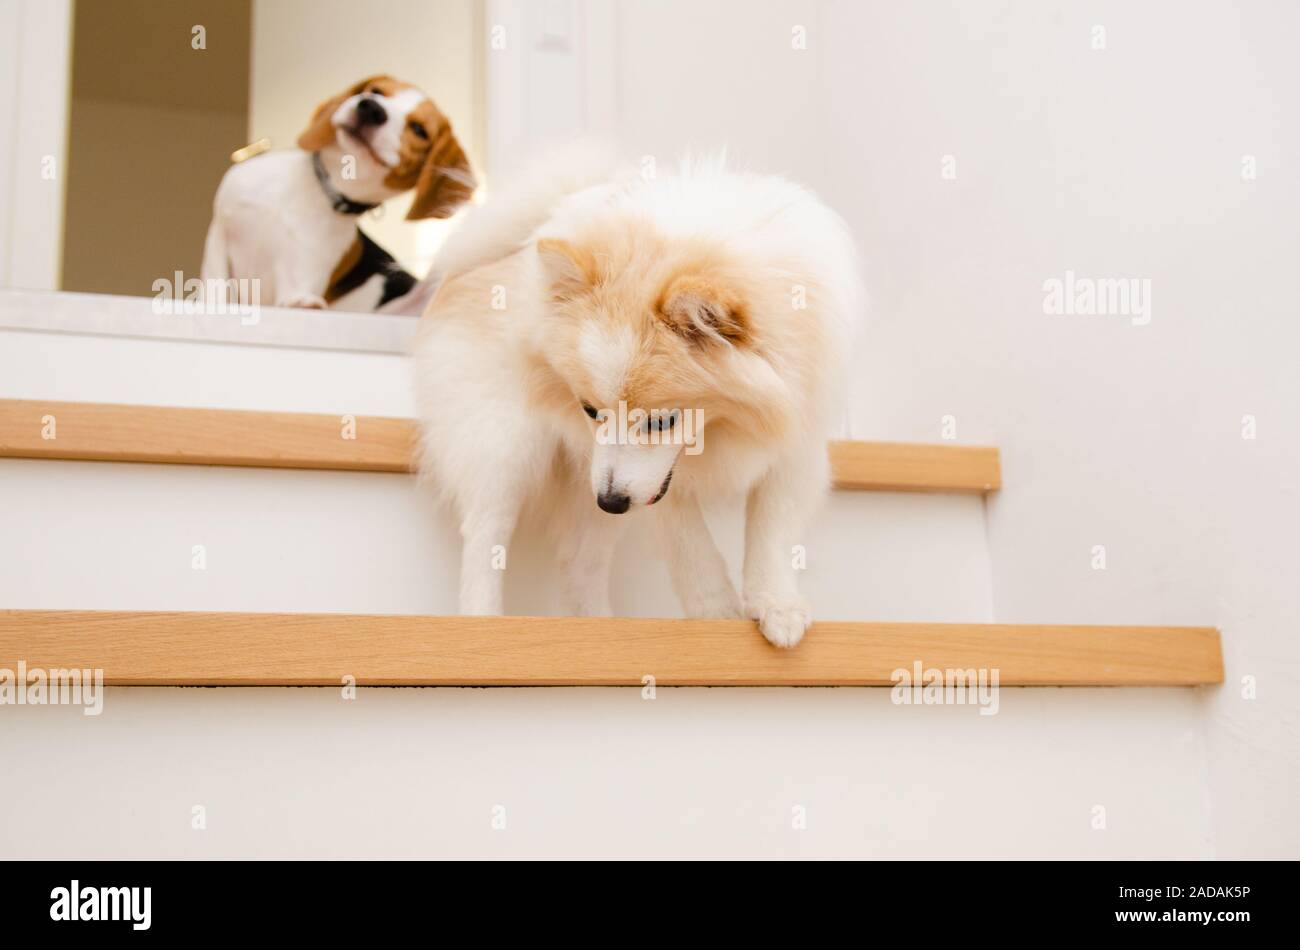 Dogs running down the stairs beagle with german spitz Stock Photo